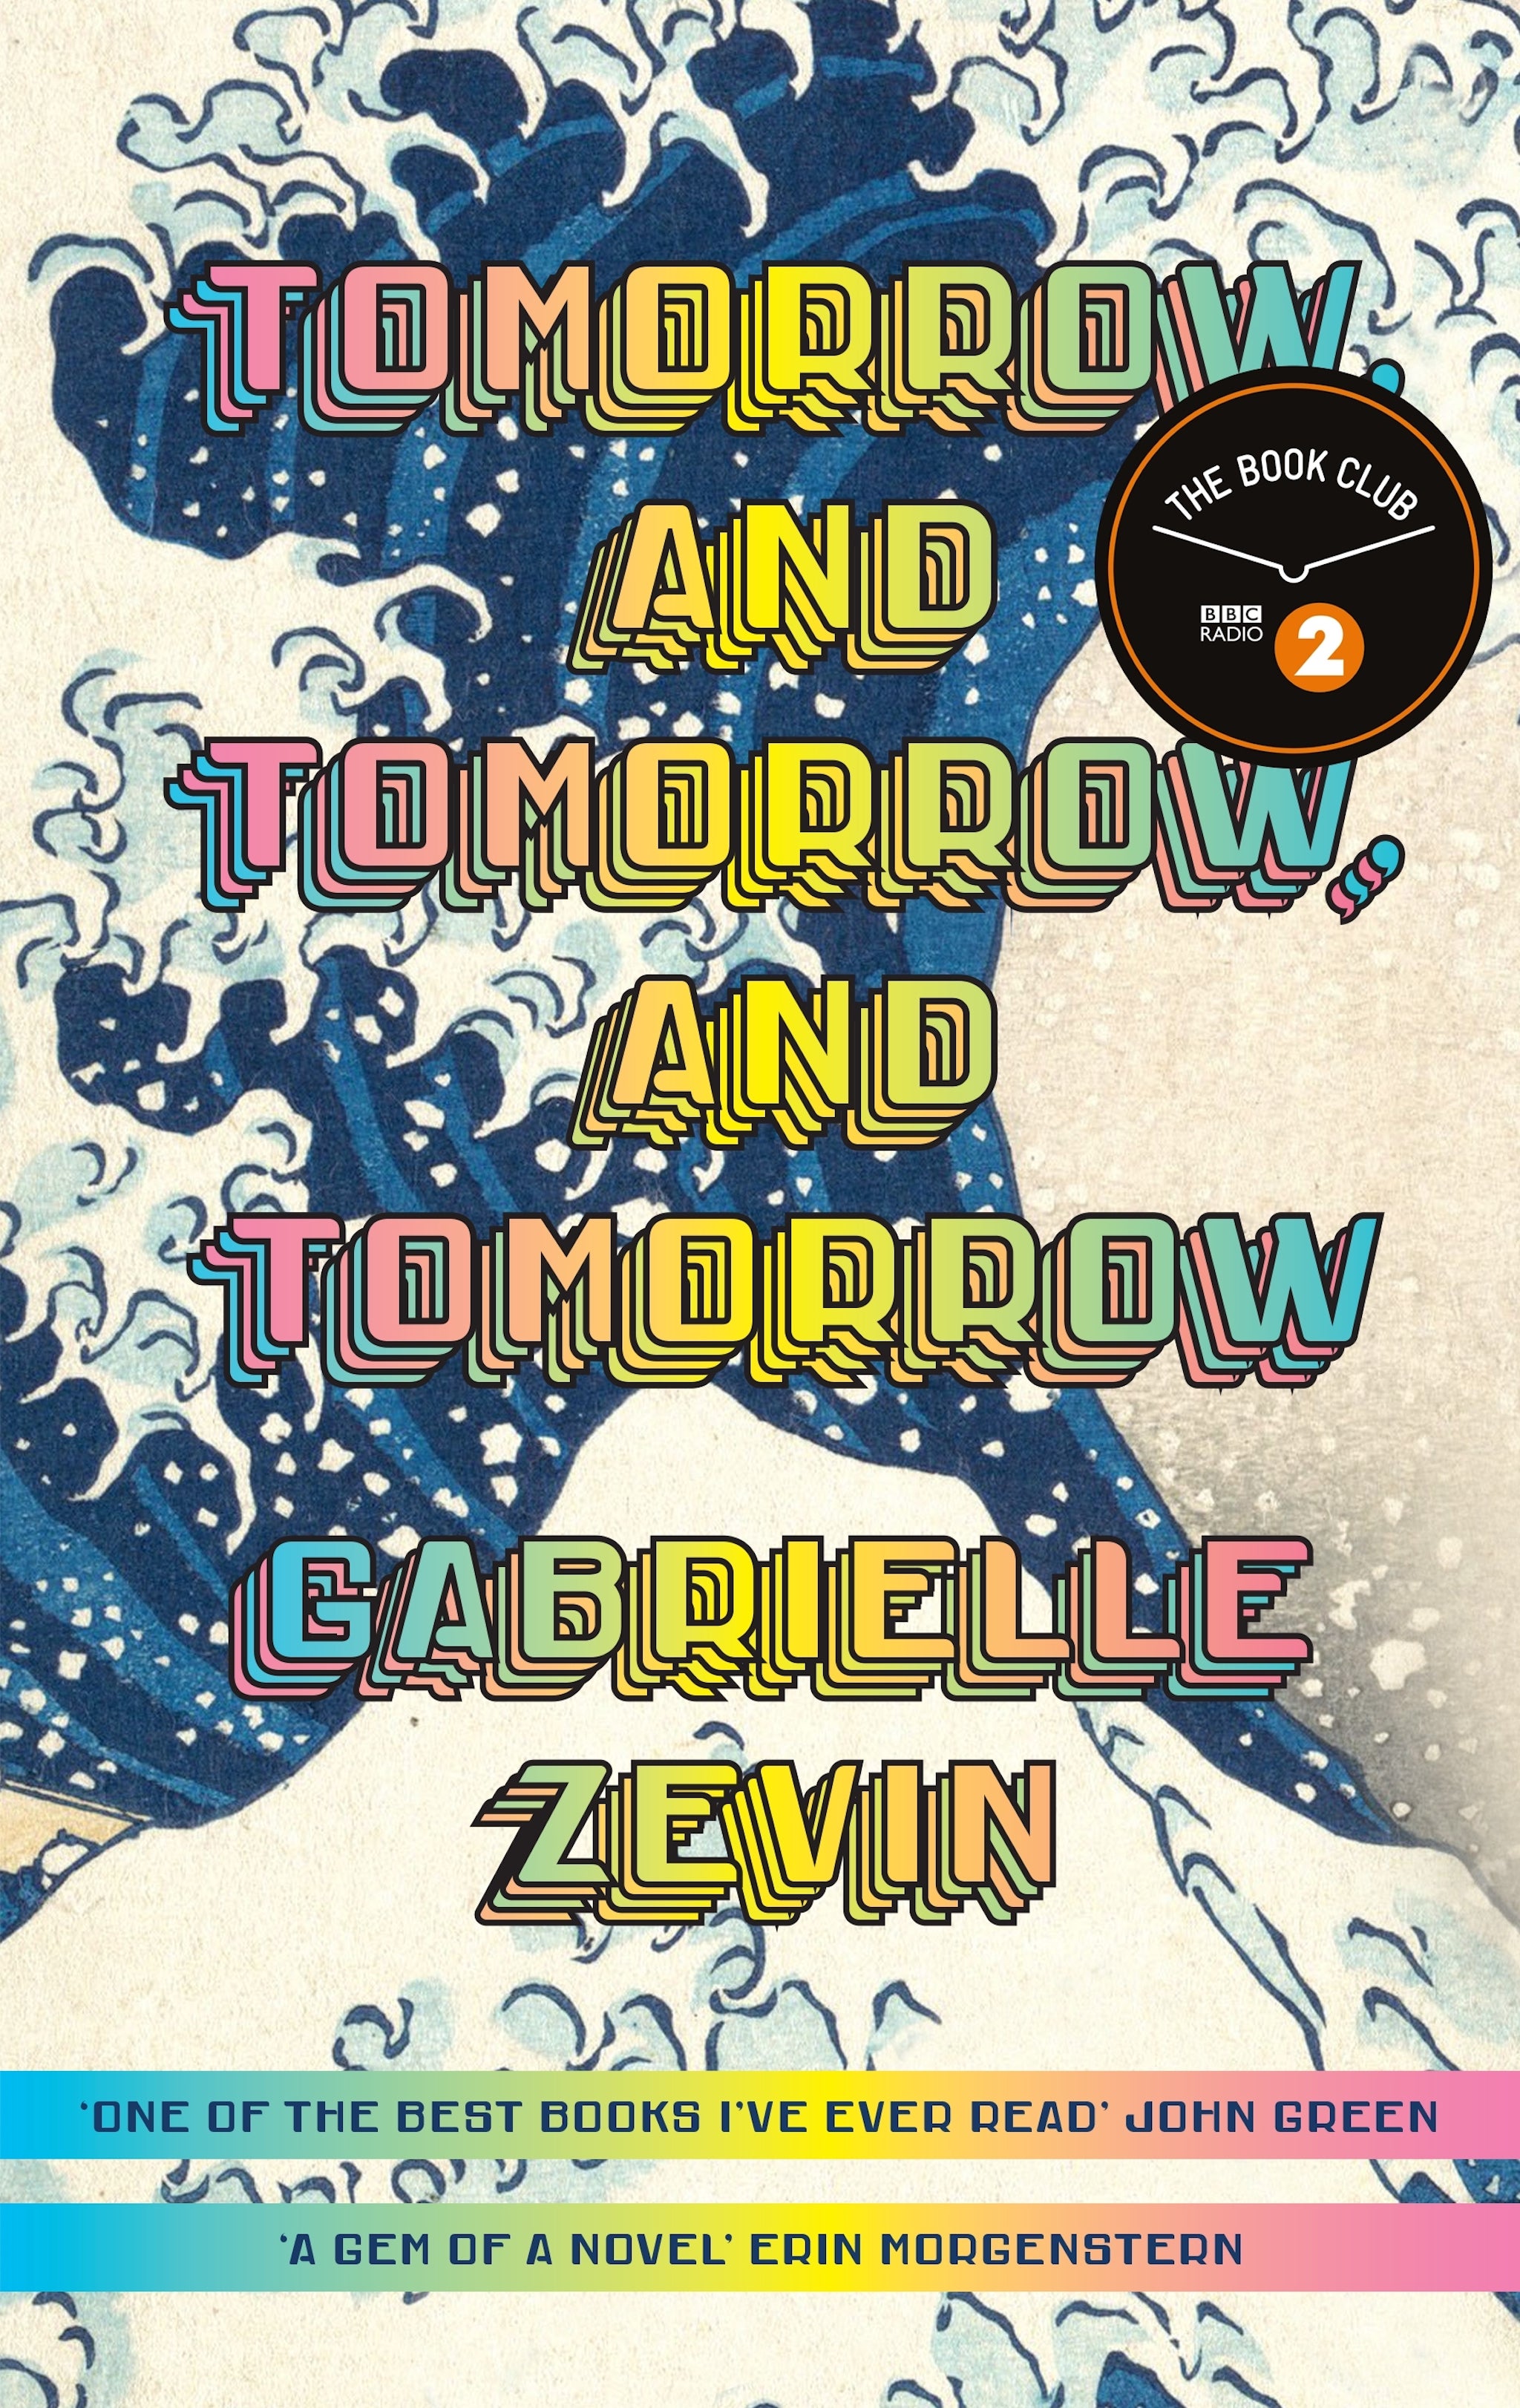 ‘Creating an online identity is a creative act,’ says Zevin, author of ‘Tomorrow and Tomorrow and Tomorrow’